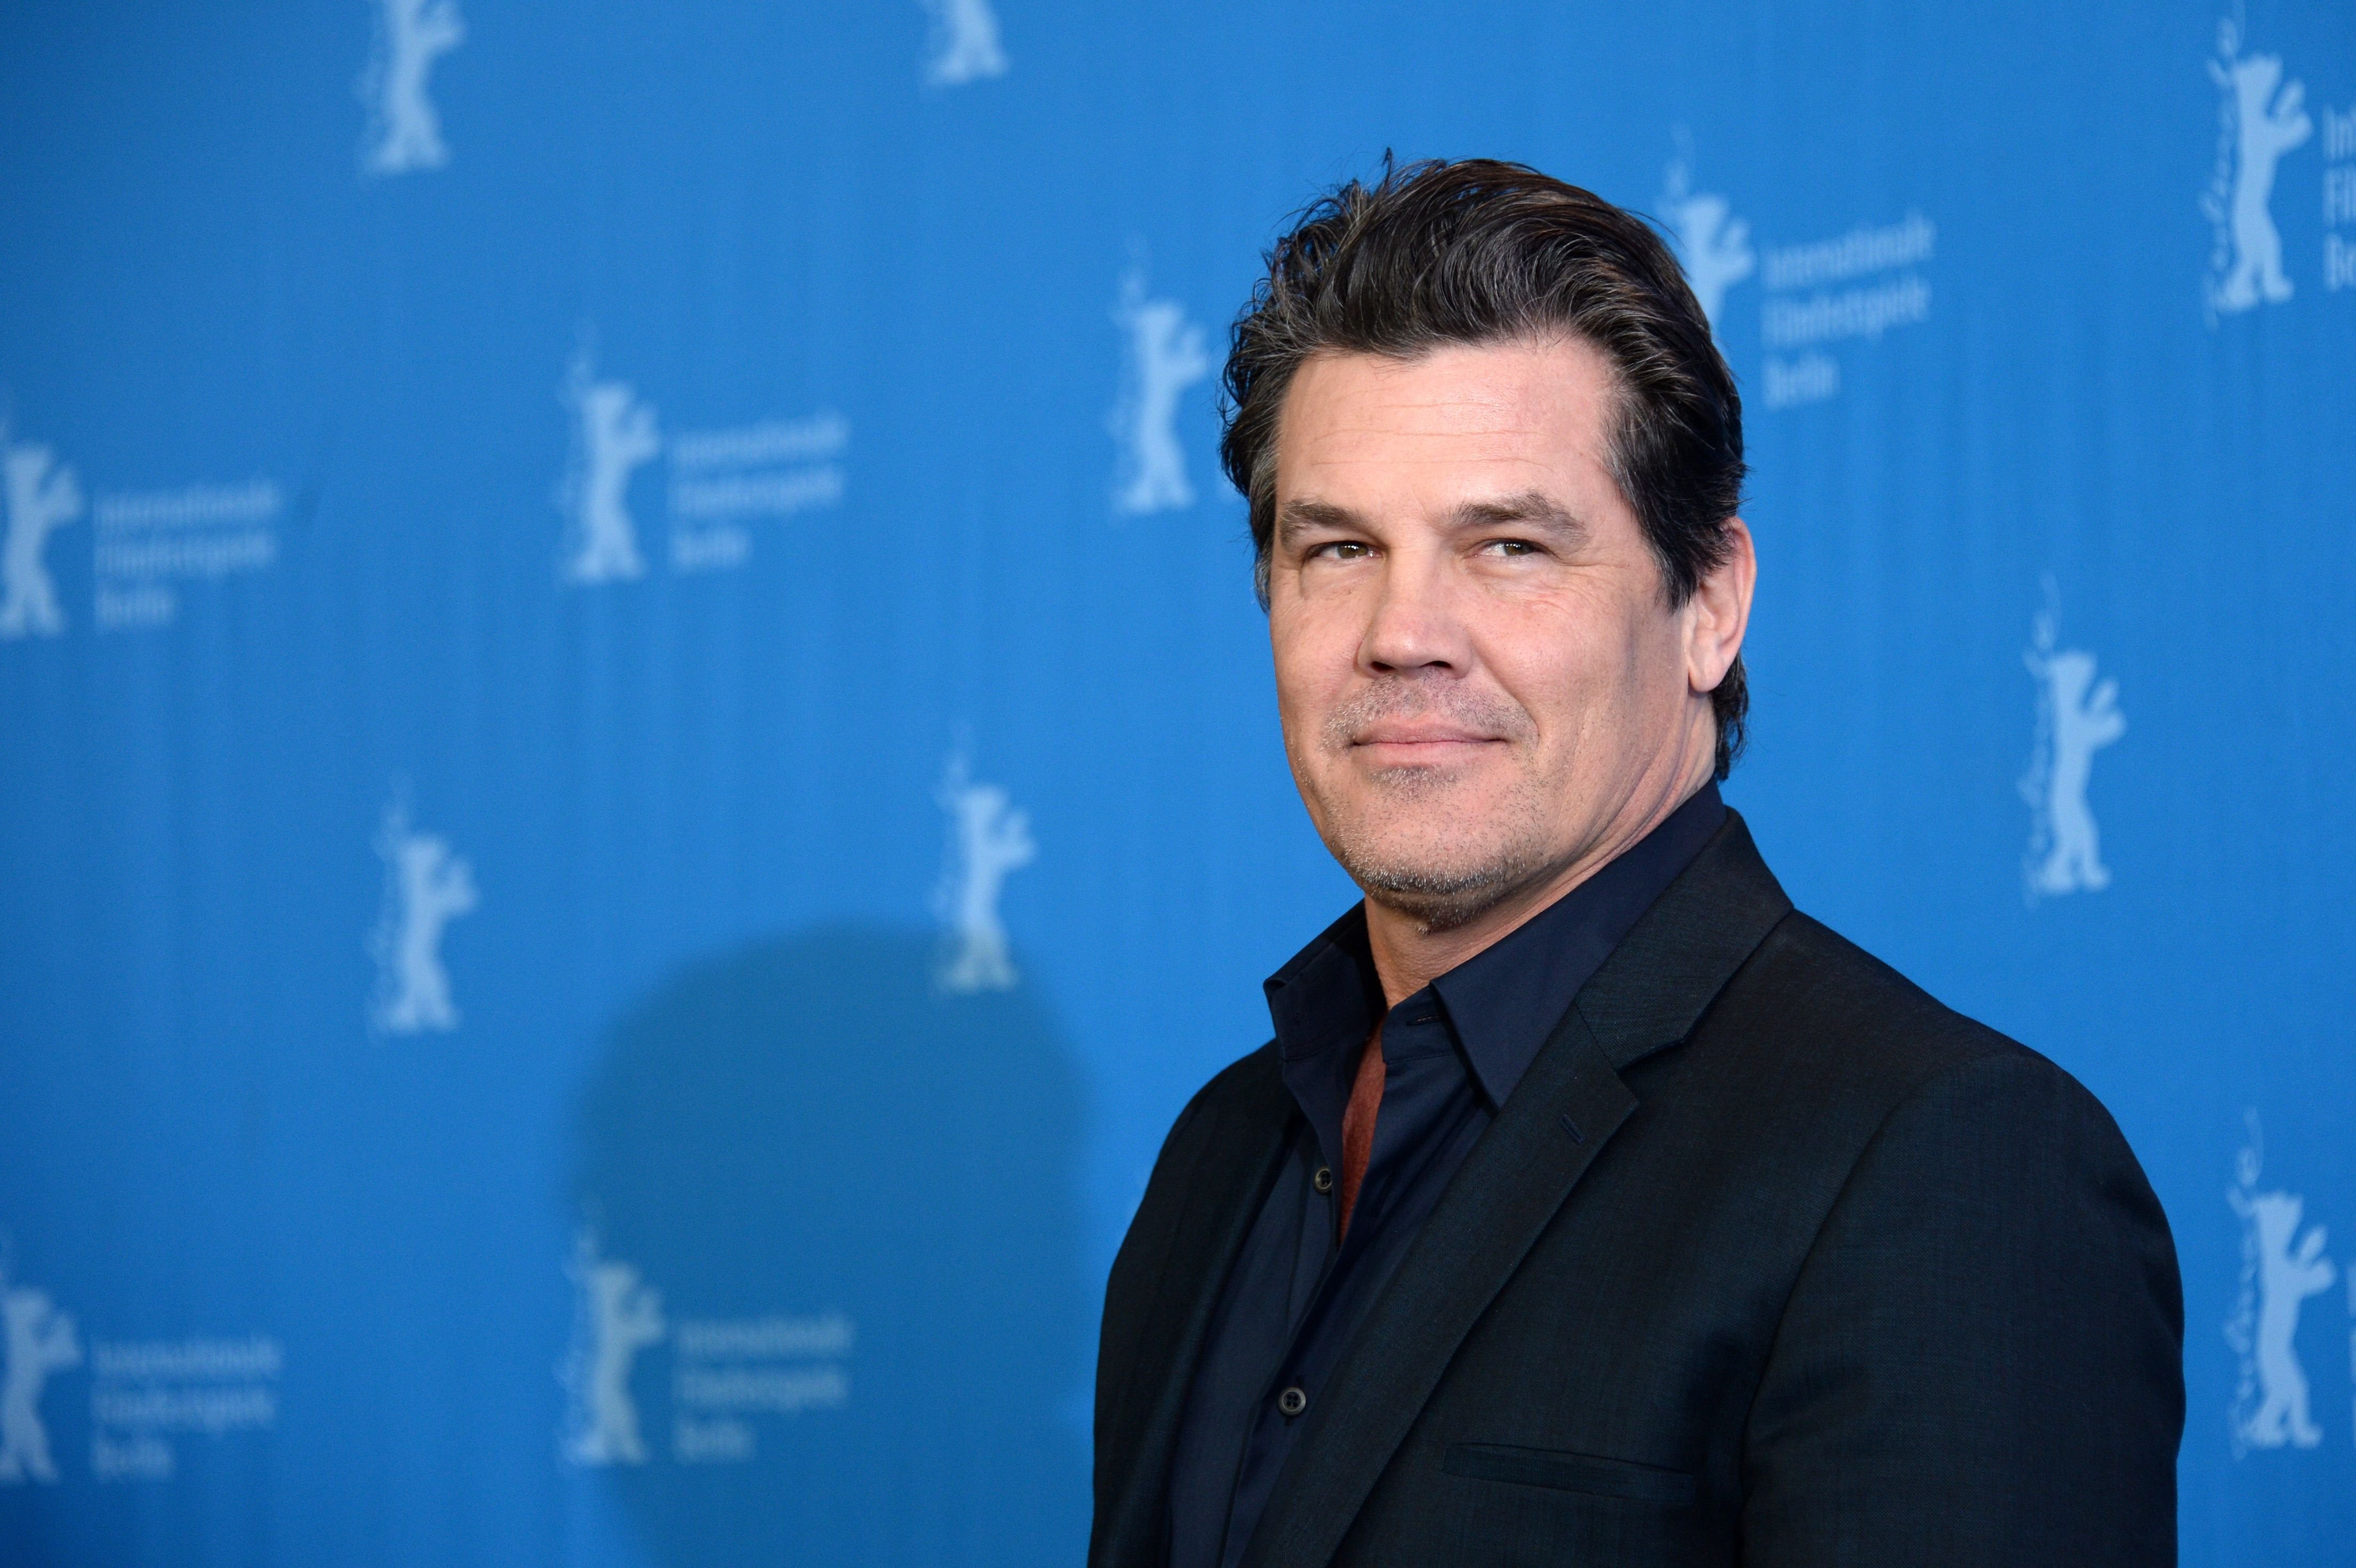 Actor Josh Brolin at the 'Hail, Caesar!' photo call during the 66th Berlinale International Film Festival Berlin at Grand Hyatt Hotel on February 11, 2016 | Photo: Getty Images